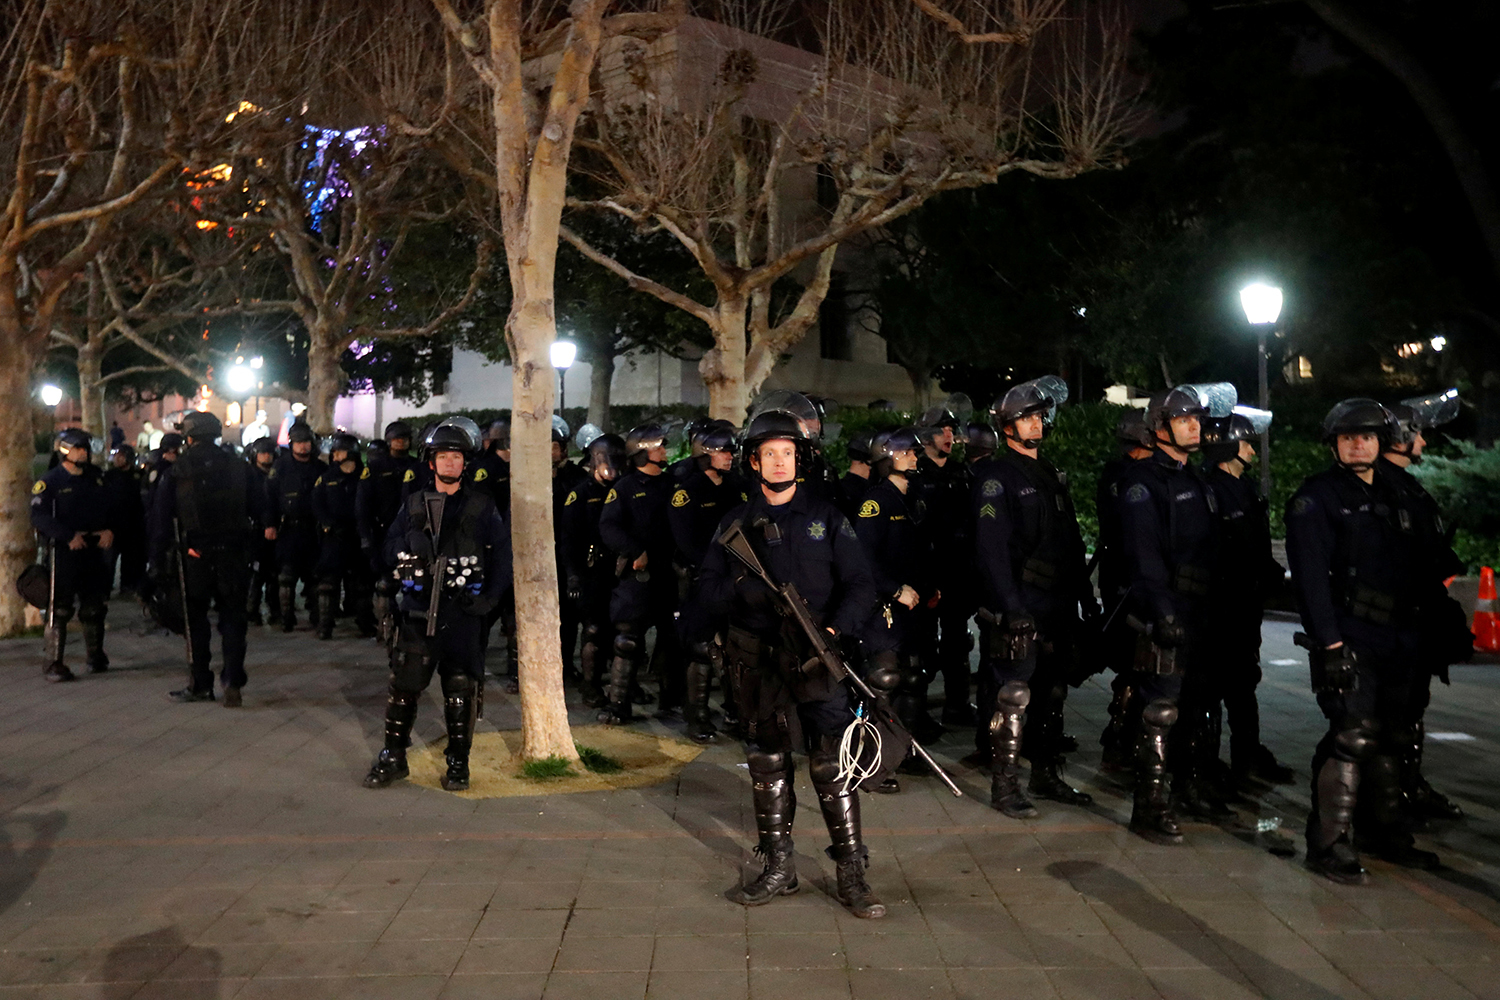 BERKELEY 2017-02-02 Police officers prepare to deploy a skirmish line after a student protest turned violent at UC Berkeley during a demonstration over right-wing speaker Milo Yiannopoulos, who was forced to cancel his talk, in Berkeley, California, U.S., February 1, 2017. REUTERS/Stephen Lam TPX IMAGES OF THE DAY Photo: / REUTERS / TT / kod 72000